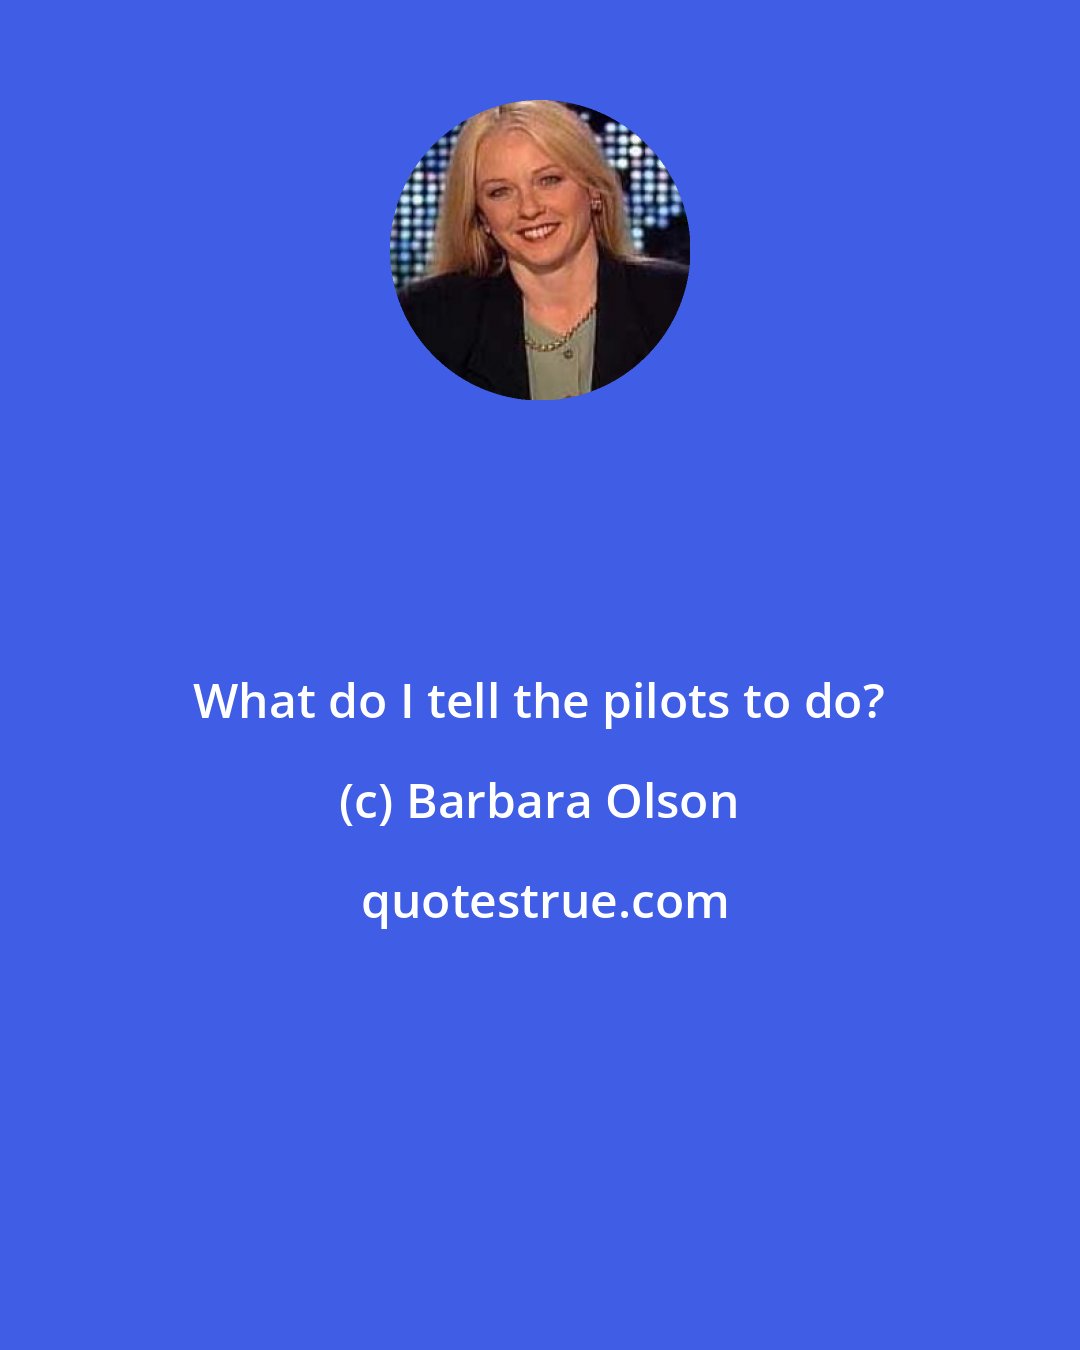 Barbara Olson: What do I tell the pilots to do?